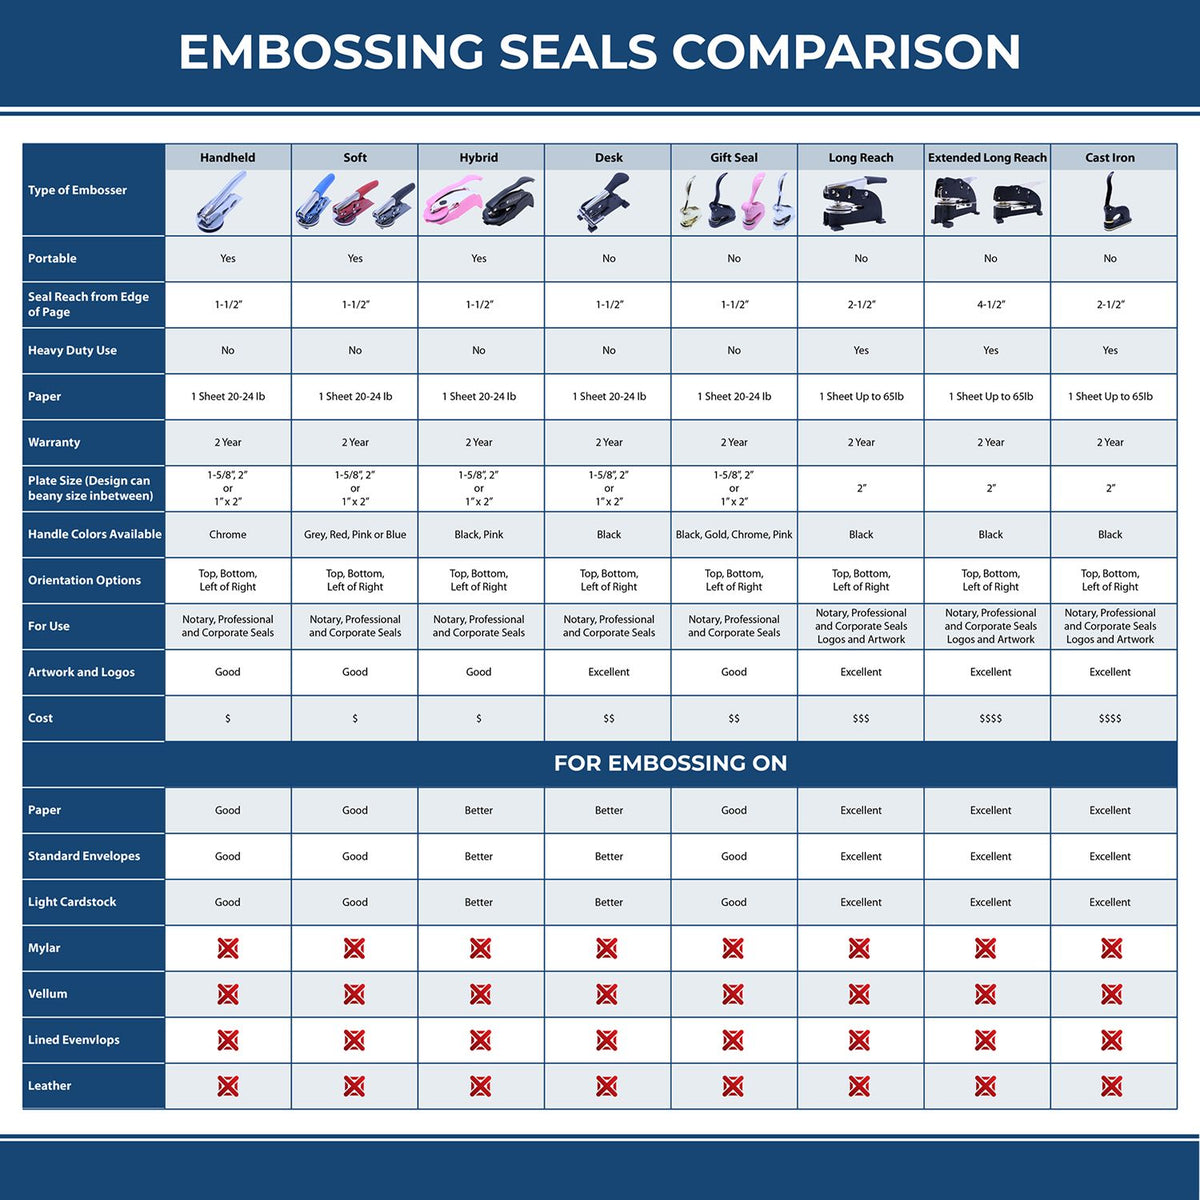 A comparison chart for the different types of mount models available for the Hybrid Arizona Land Surveyor Seal